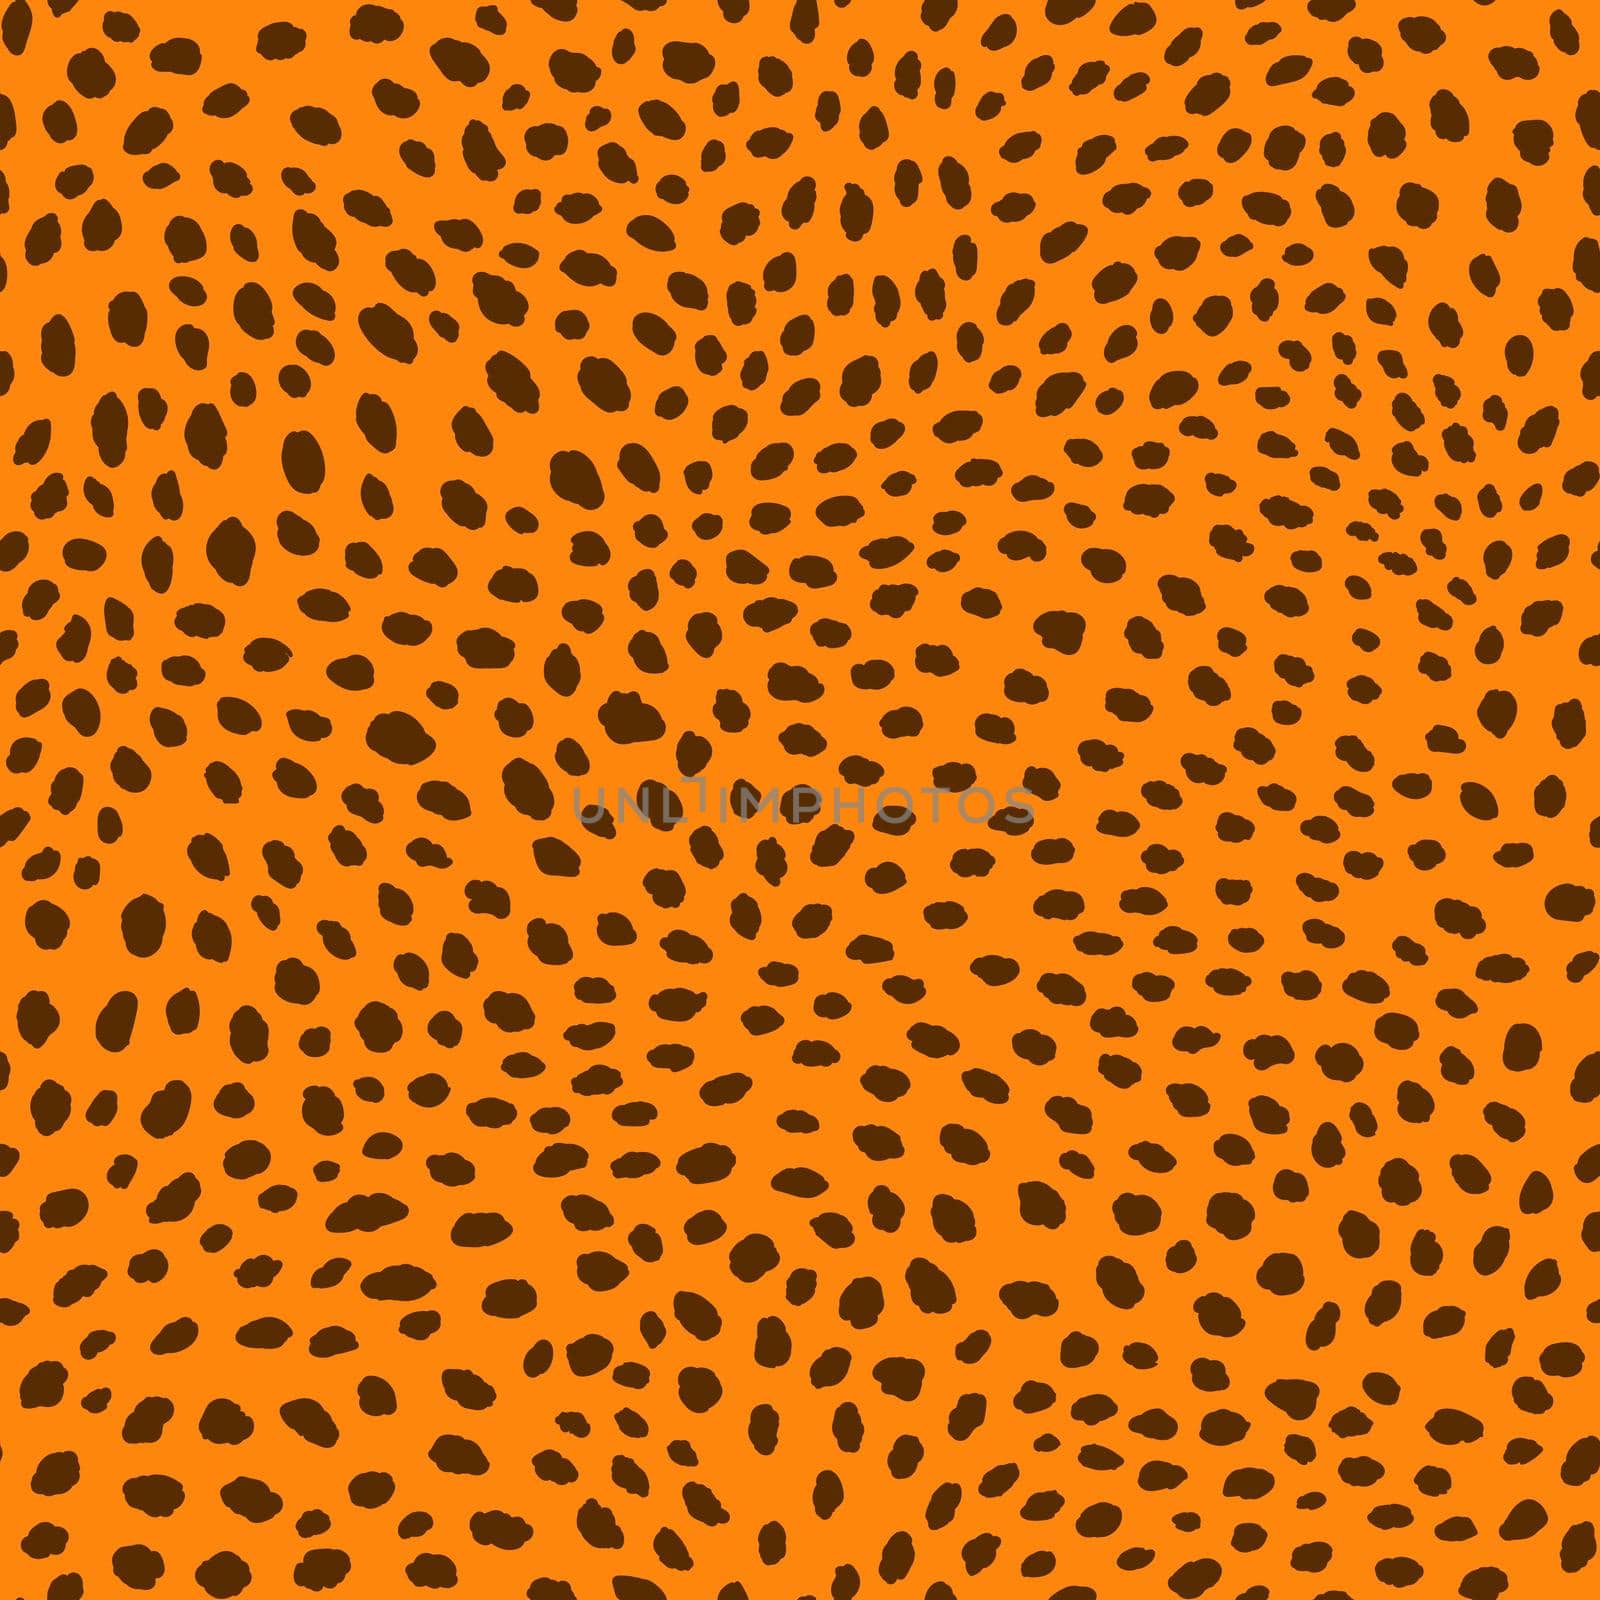 Abstract modern leopard seamless pattern. Animals trendy background. Orange and brown decorative vector stock illustration for print, card, postcard, fabric, textile. Modern ornament of stylized skin by allaku